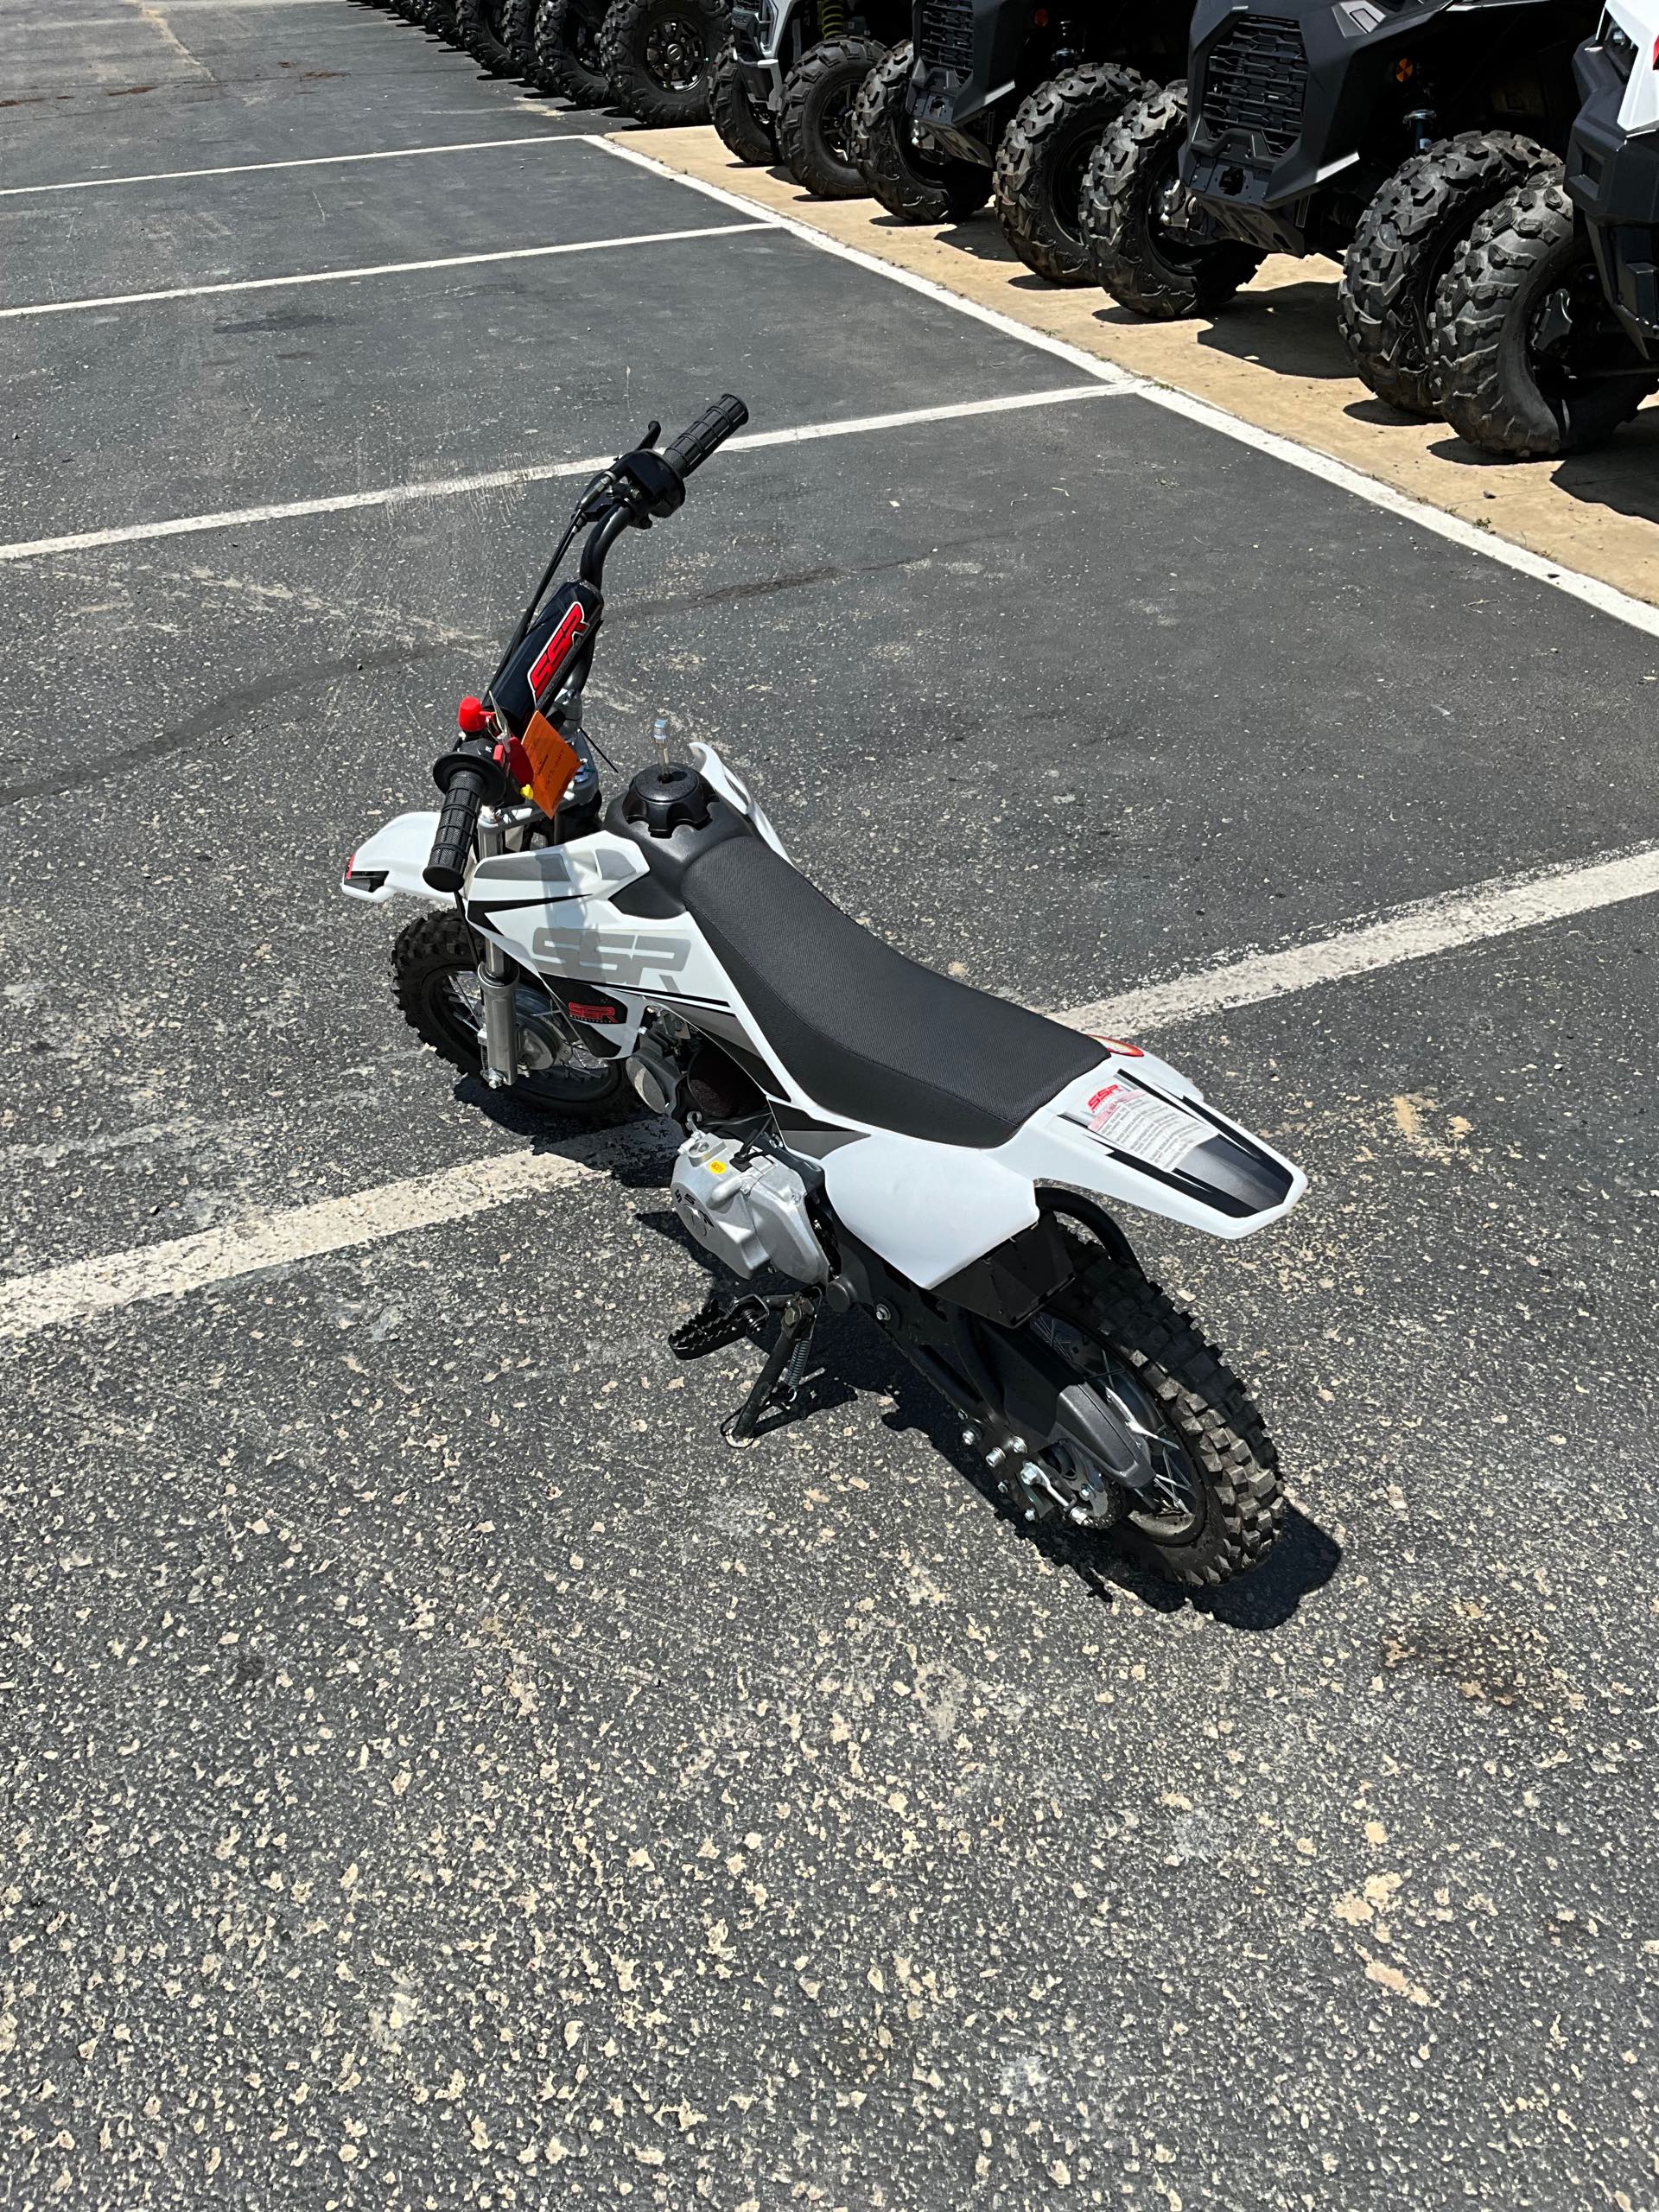 2021 SSR Motorsports SR70 AUTO at Leisure Time Powersports of Corry